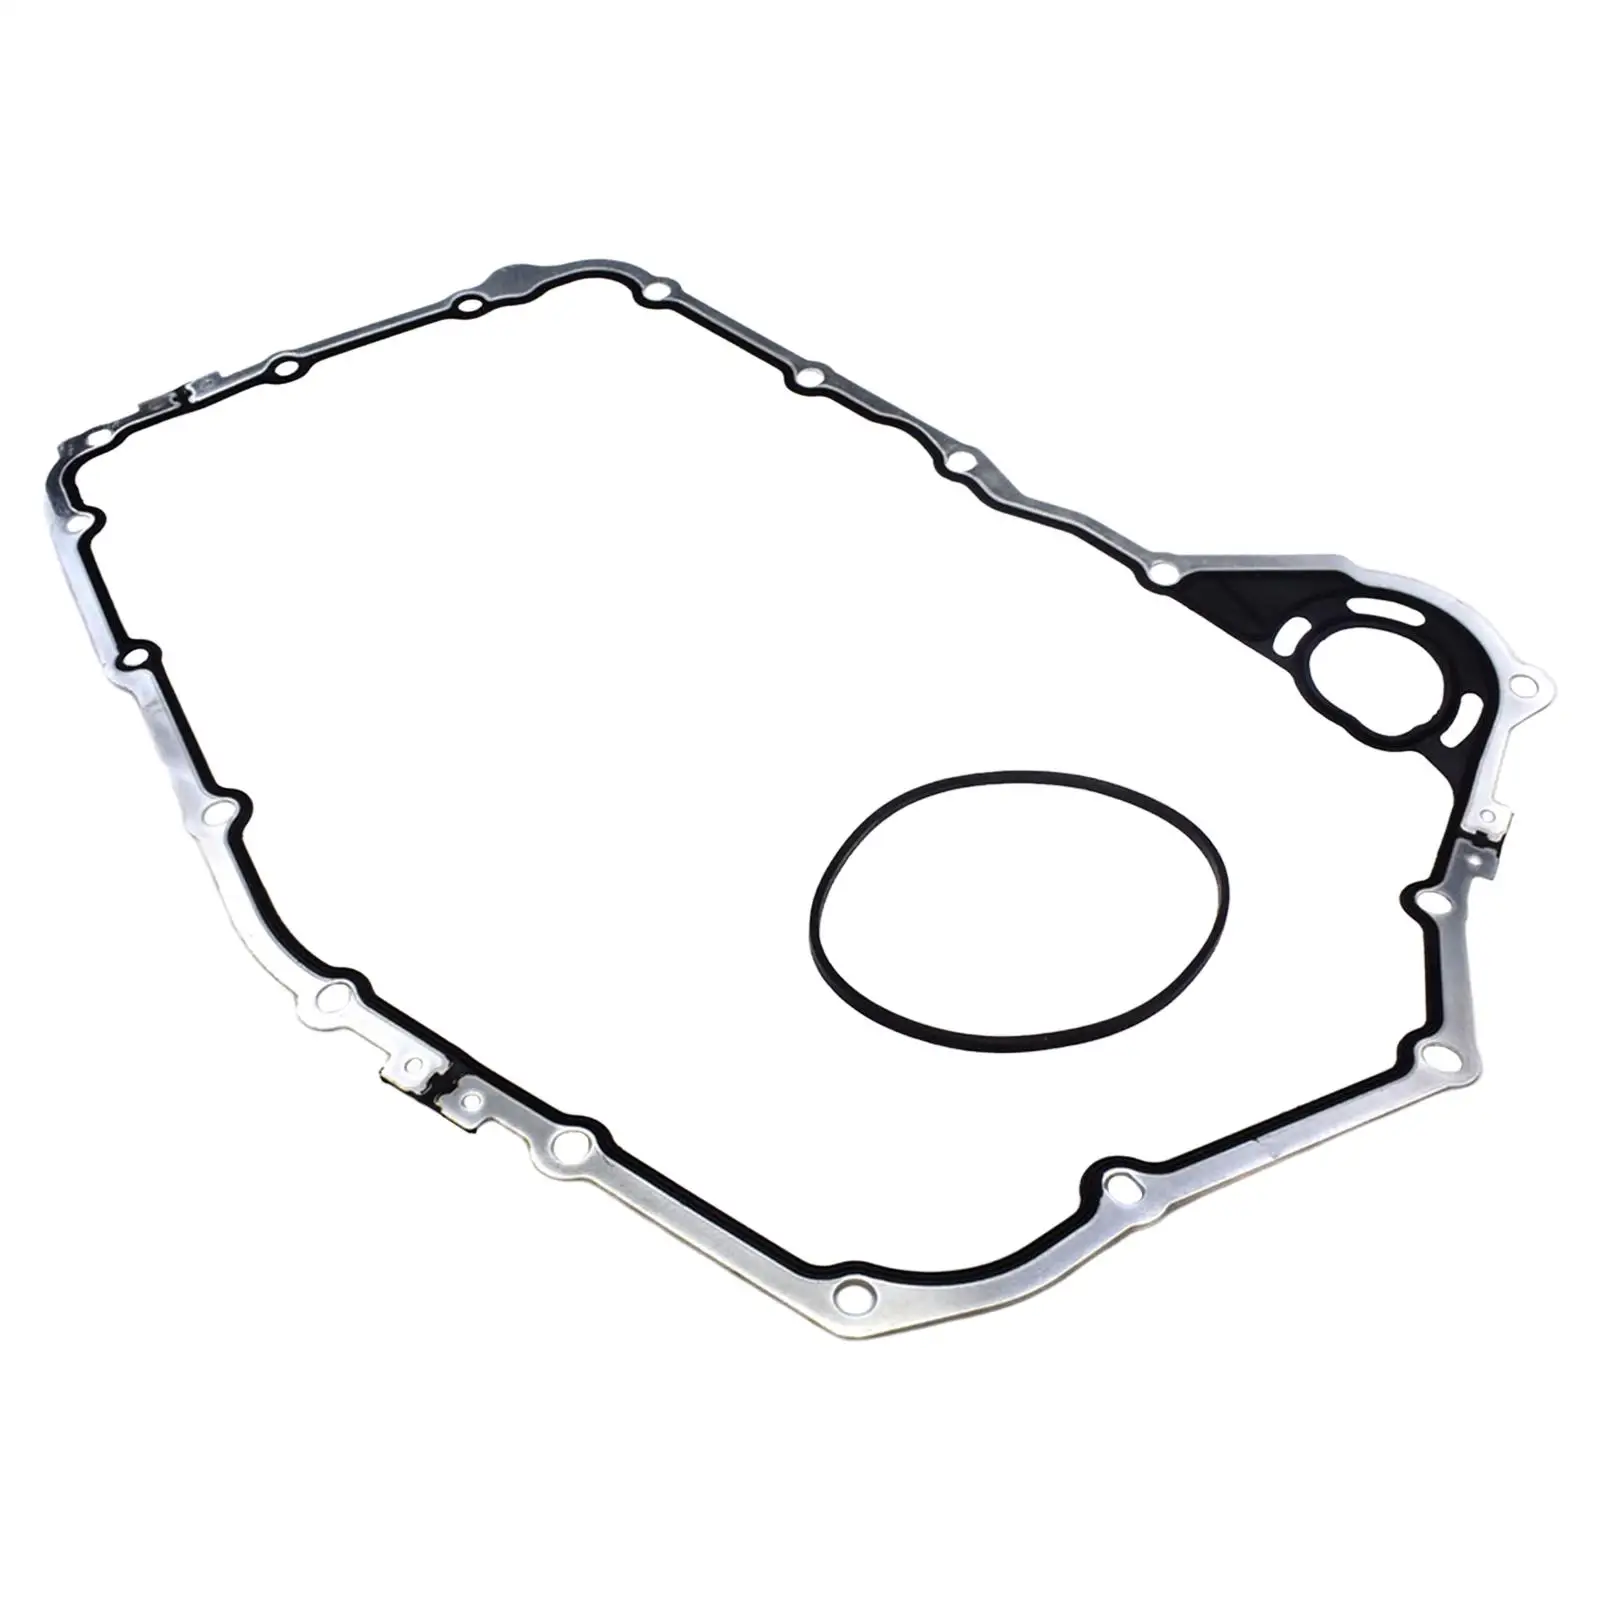 4T65E Automatic Transmission Case Gasket 24206959 Side Cover Seal Kit Fits for Buick 3.0 2.5/S80 Auto Rubber Parts